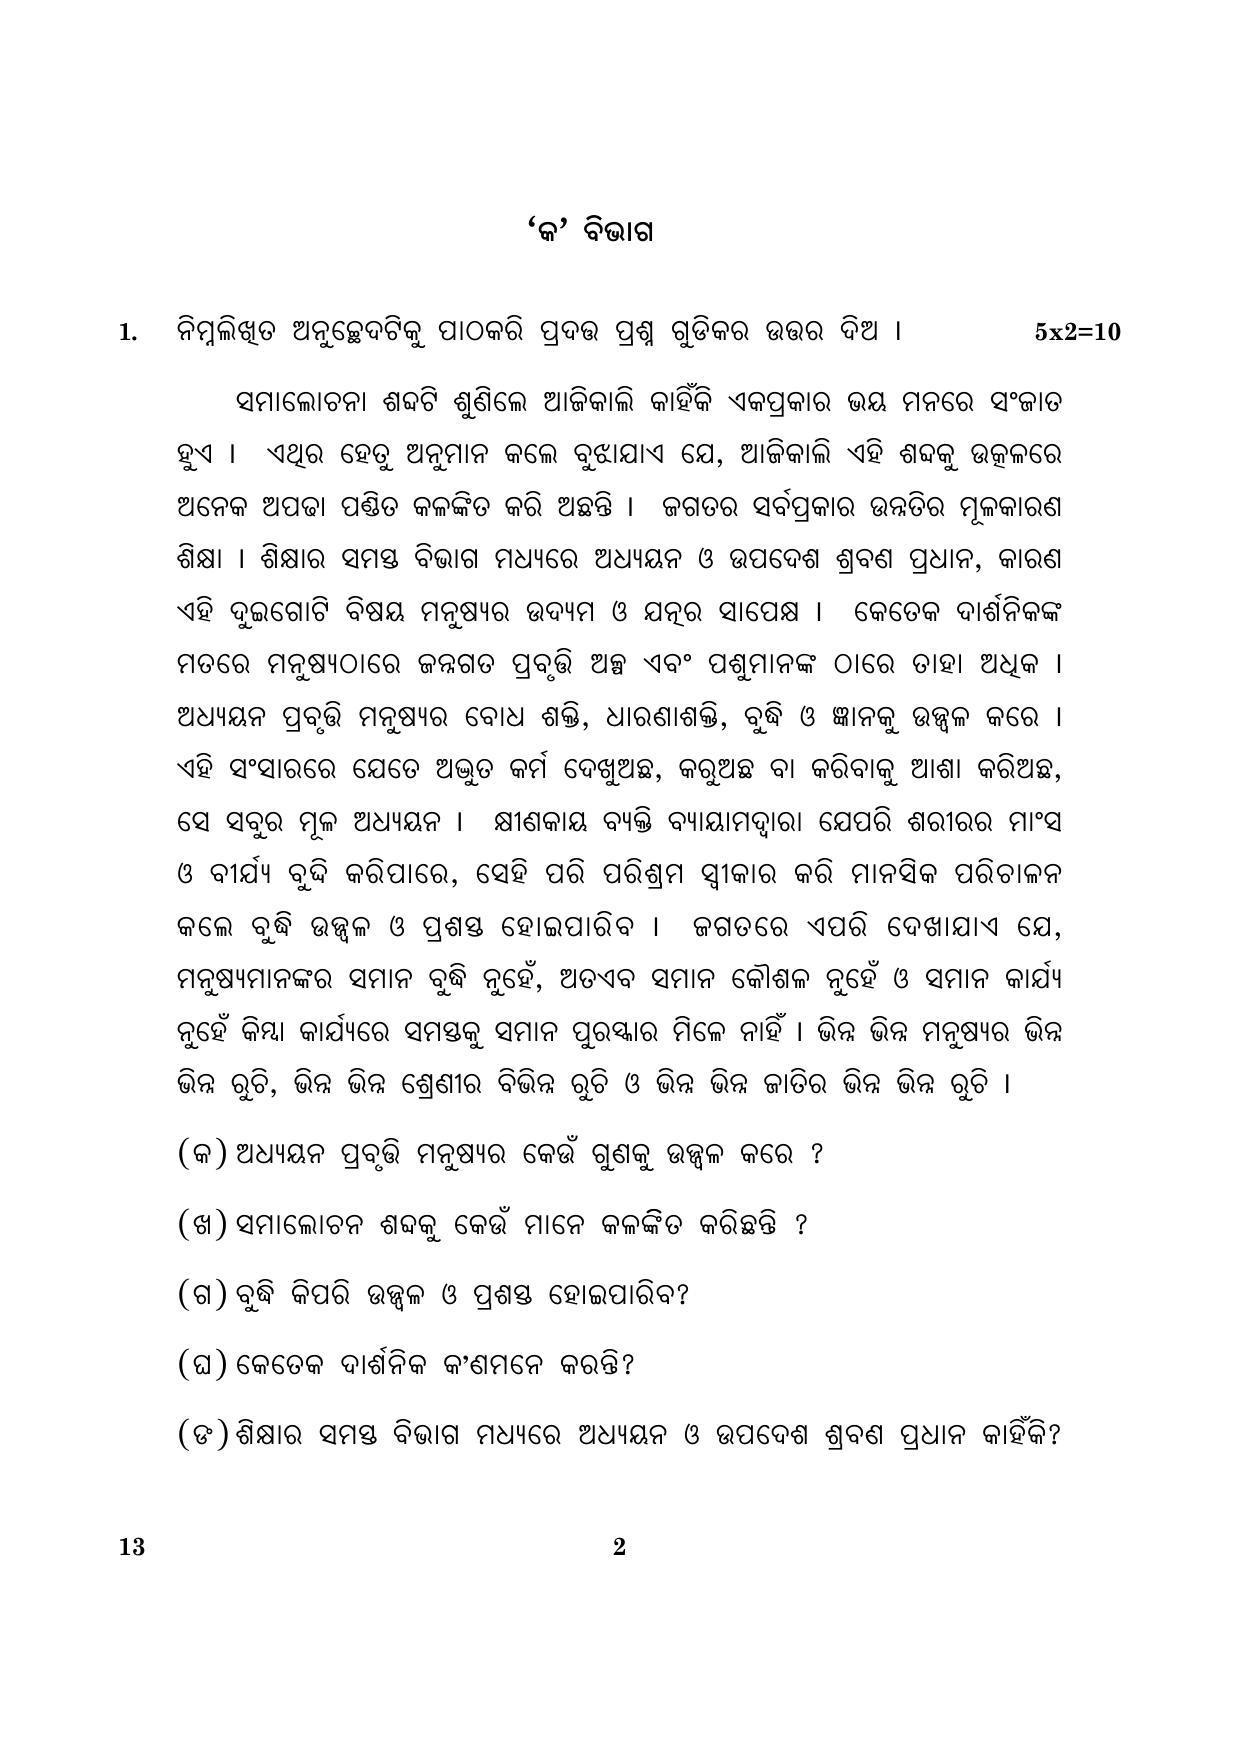 CBSE Class 12 013 Odia 2016 Question Paper - Page 2